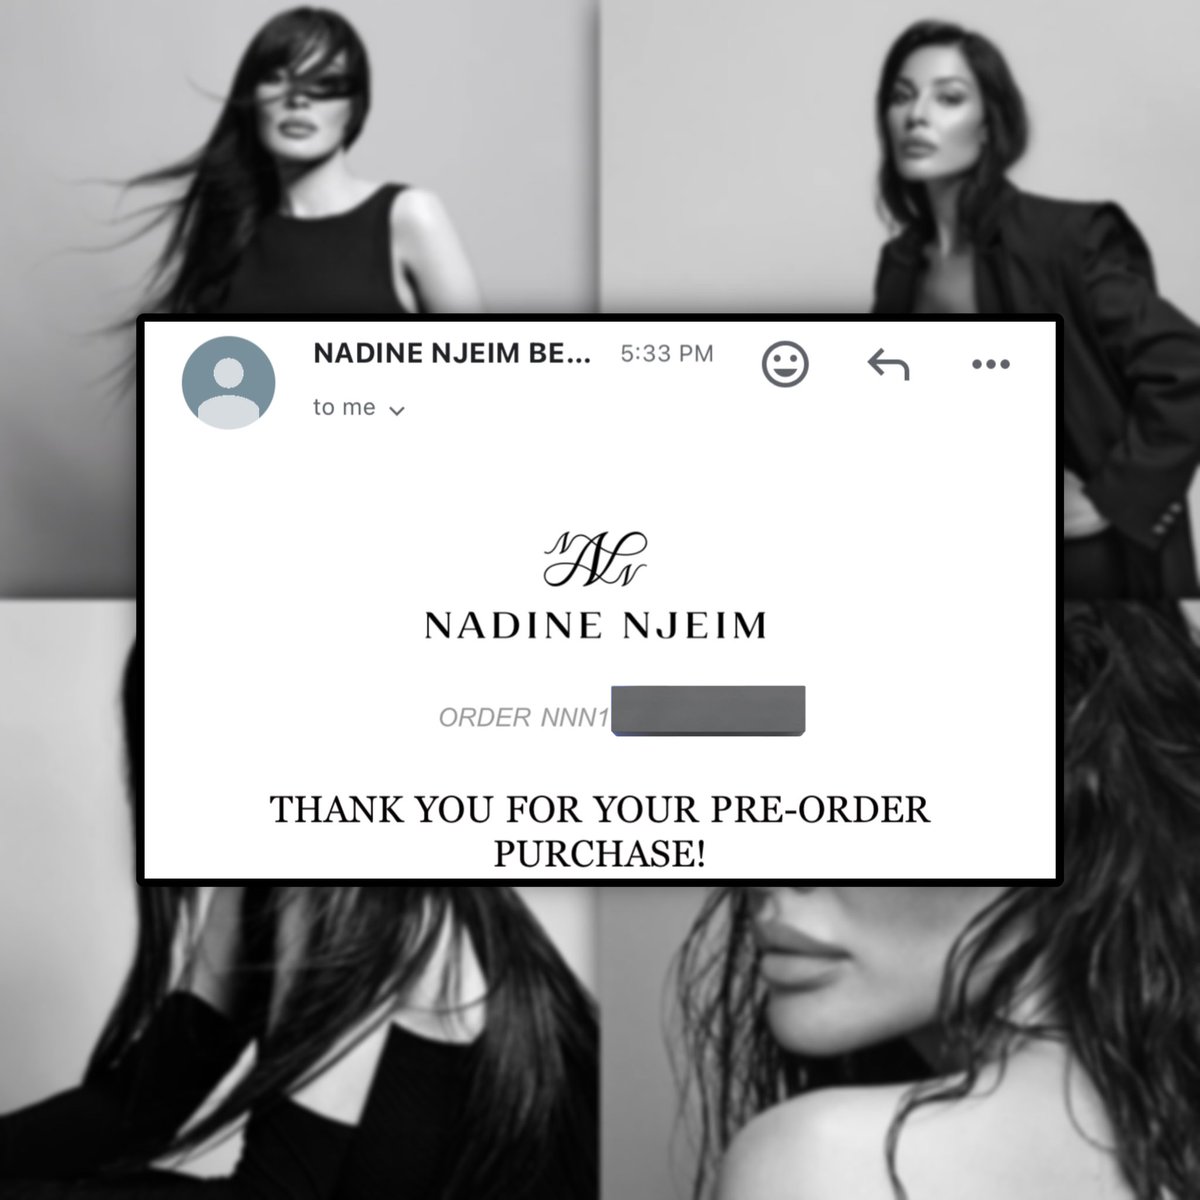 #nnnbeauty : We're done! Can't wait to try them out.. What about you guys? 🤩🤍🤍
ماذا عنكم؟ شاركونا ما قمتم بطلبه من نادين نجيم بيوتي .. 
『 @nadinenjeim ، #نادين_نسيب_نجيم』